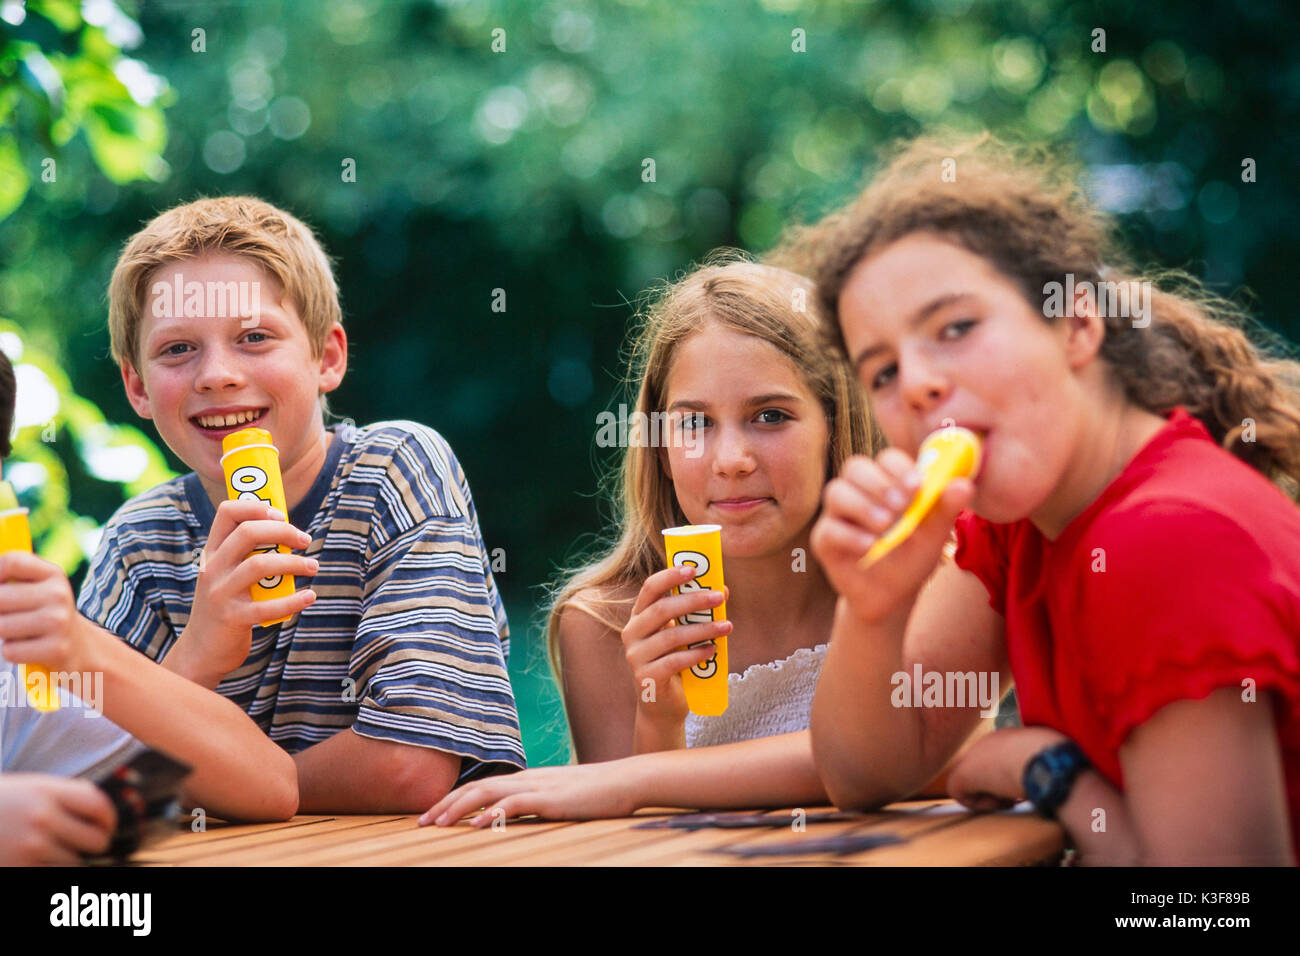 Group of children / young persons while eating ice Stock Photo